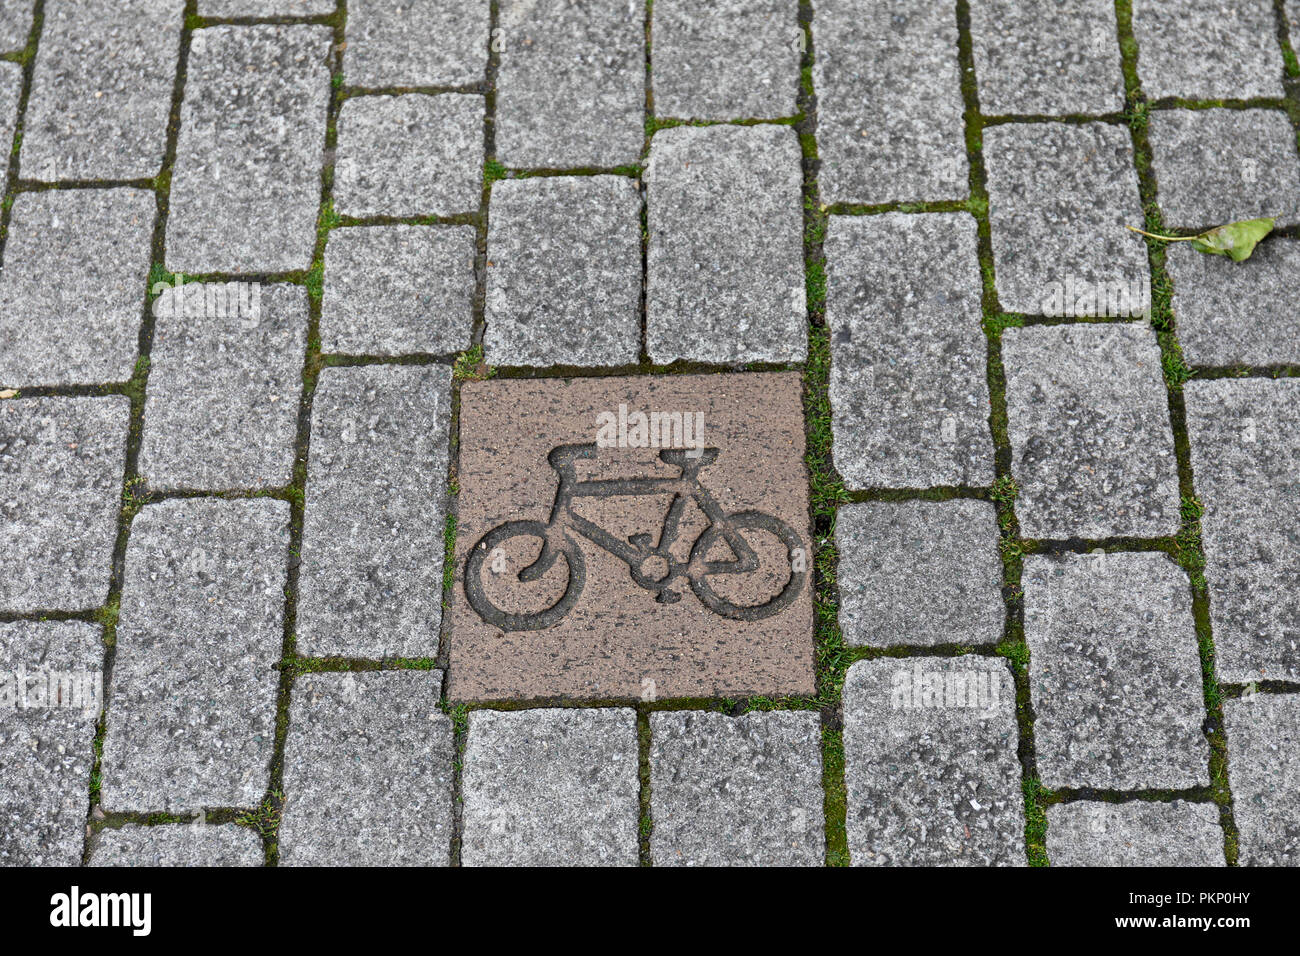 Brown square Location tile montrant cycling route, Bristol, Angleterre Banque D'Images